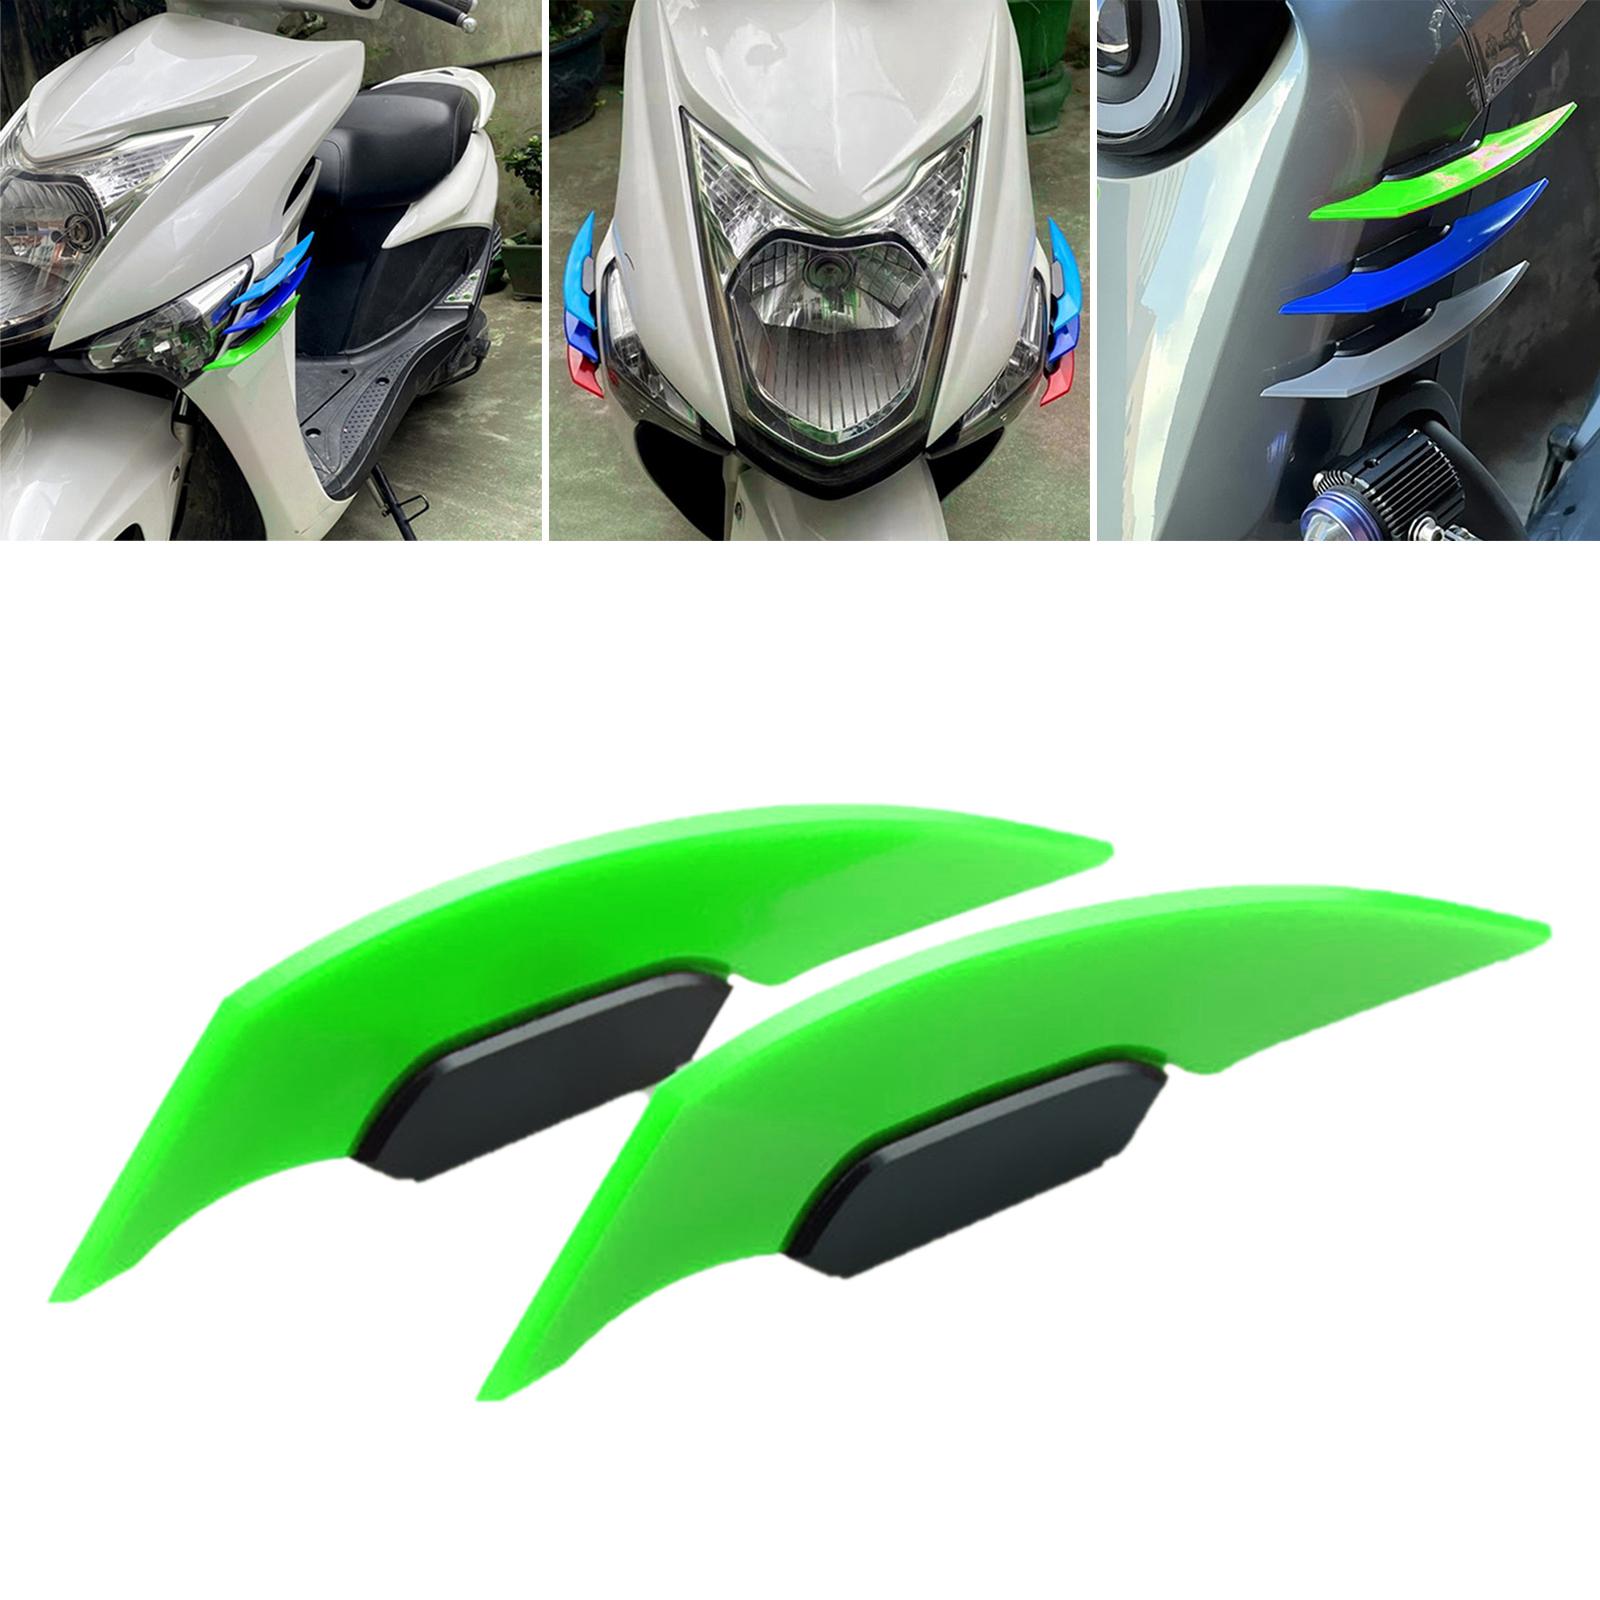 Motorcycle Winglet Aerodynamic Spoiler Wing Fit for Electric Motorcycles Green